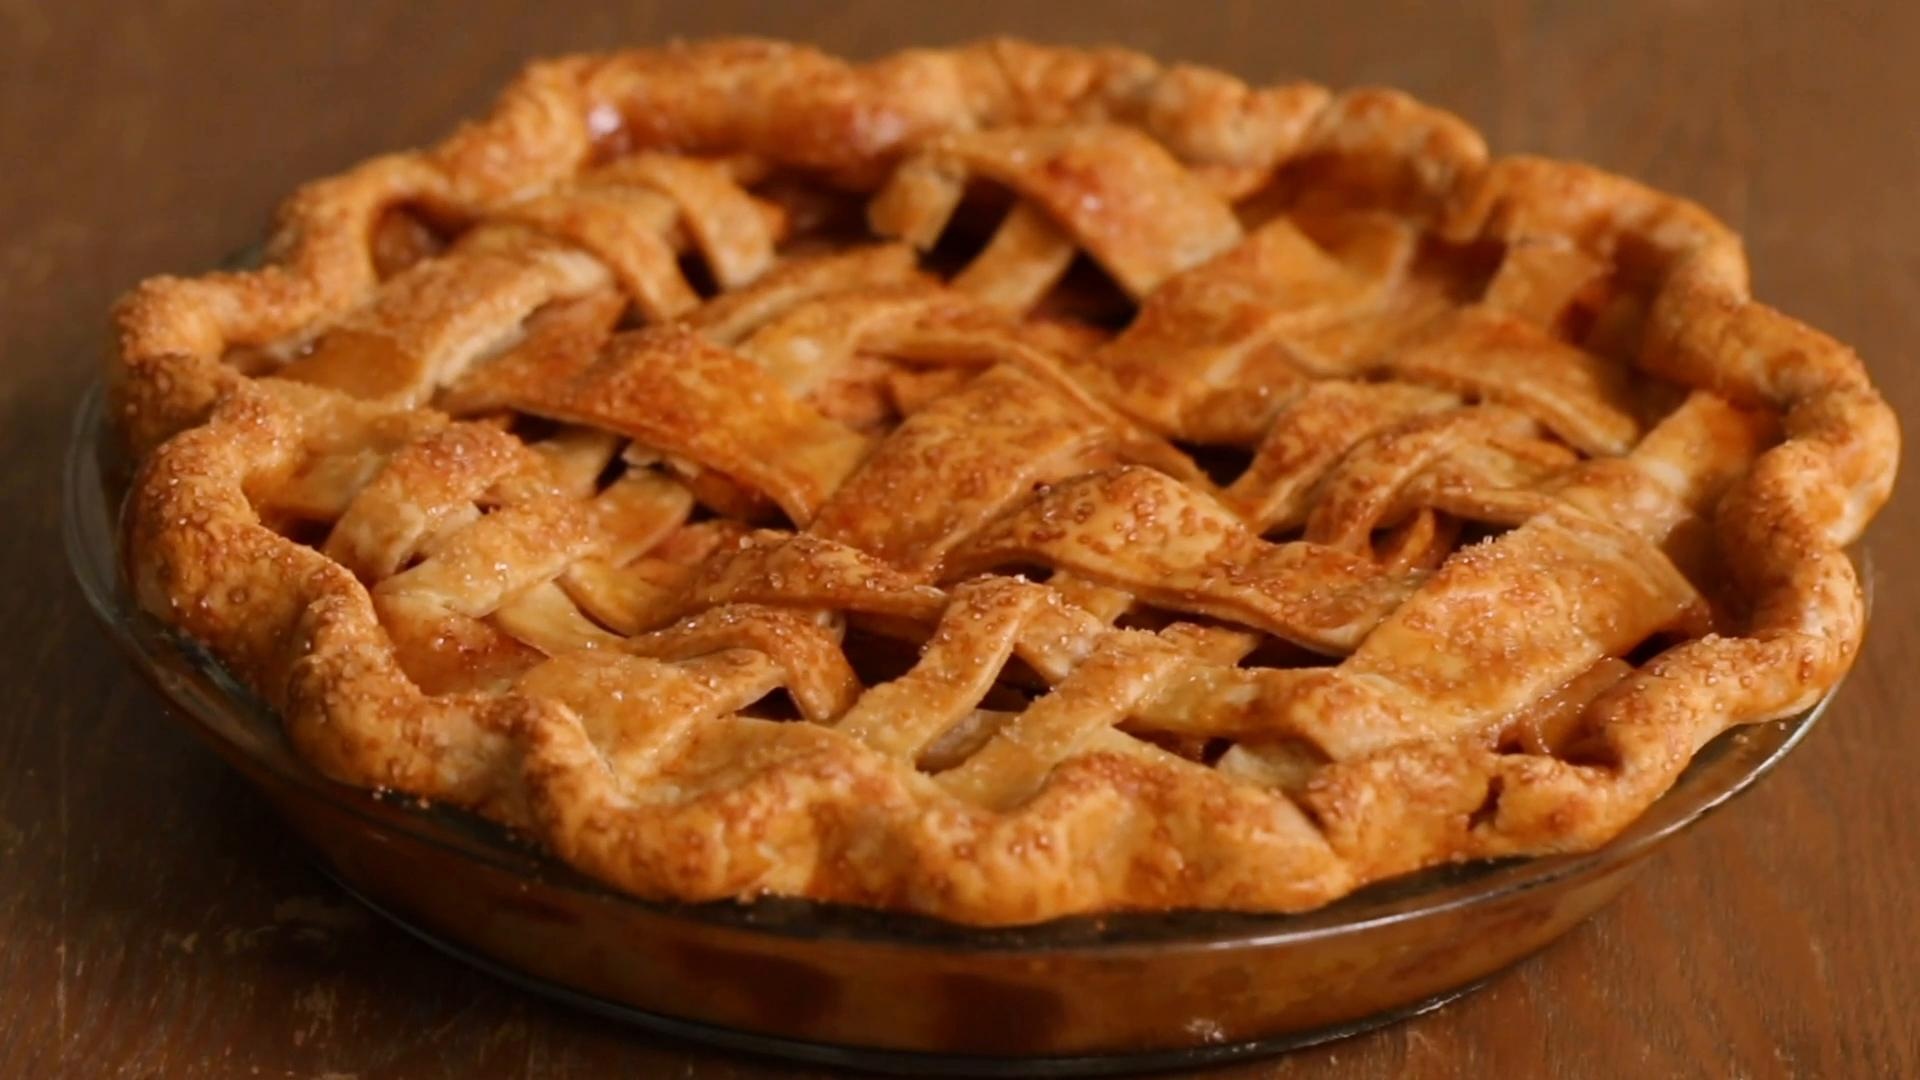 Pie: Lattice-topped, A decorative crust with strips of dough woven over the filling. 1920x1080 Full HD Wallpaper.